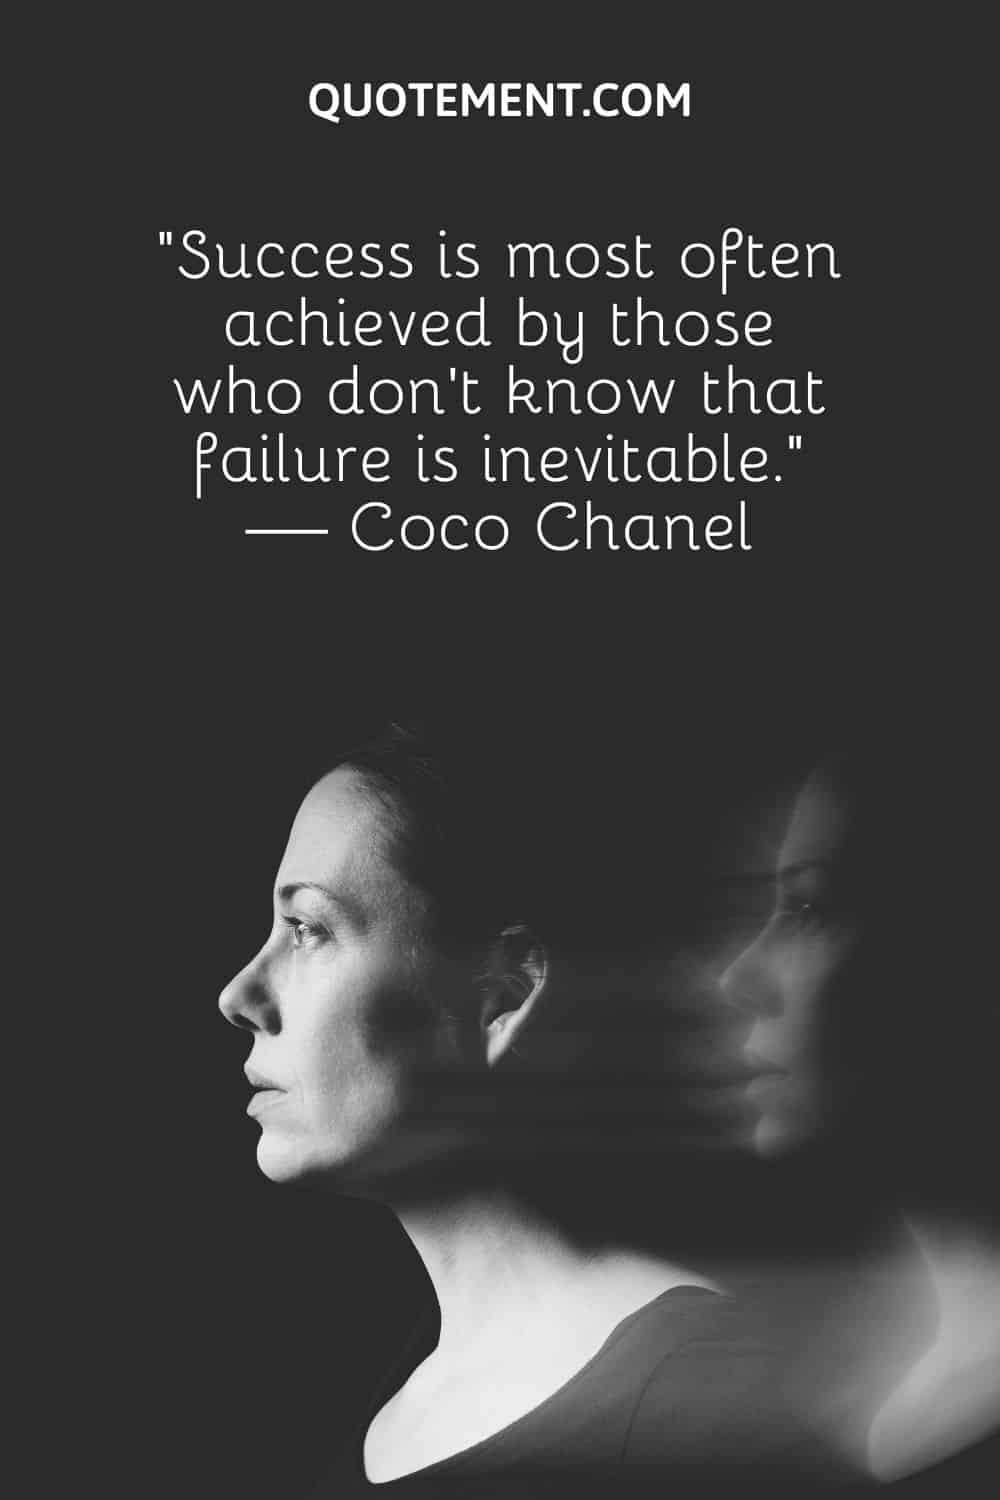 Success is most often achieved by those who don't know that failure is inevitable. — Coco Chanel